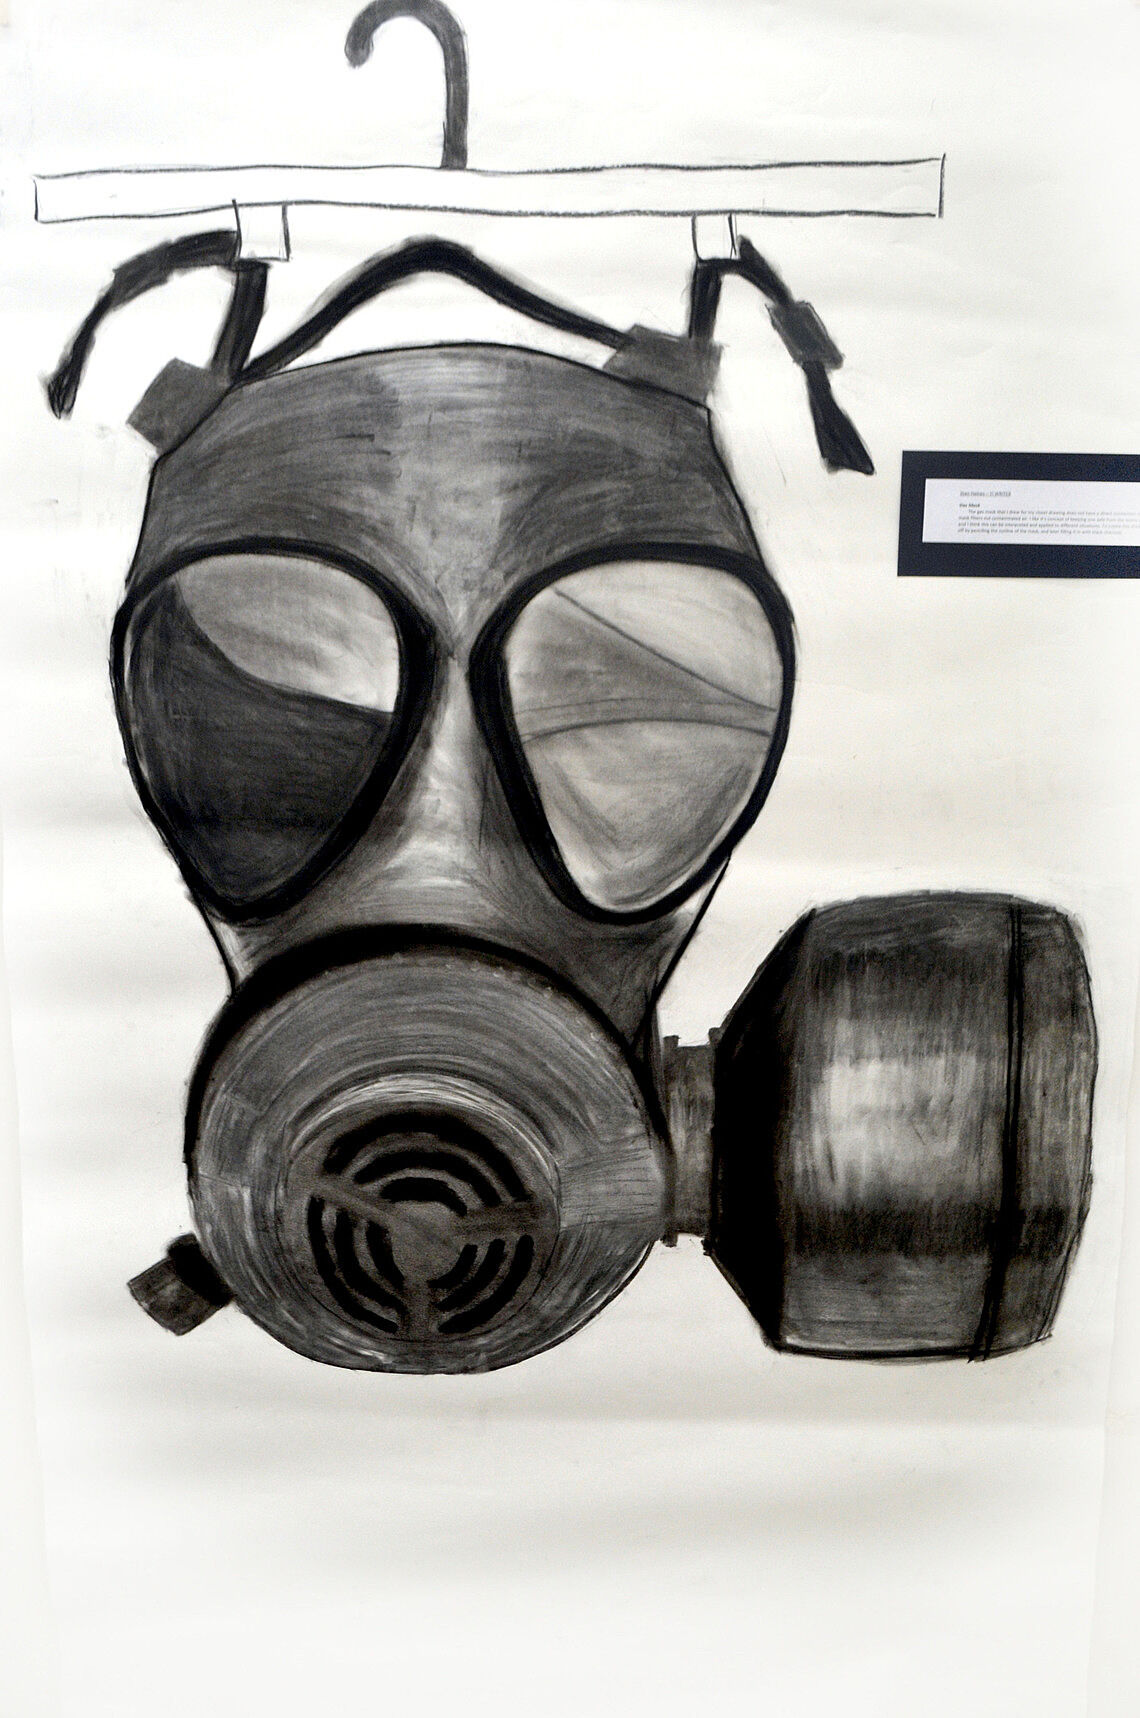 A drawing of a gas mask.